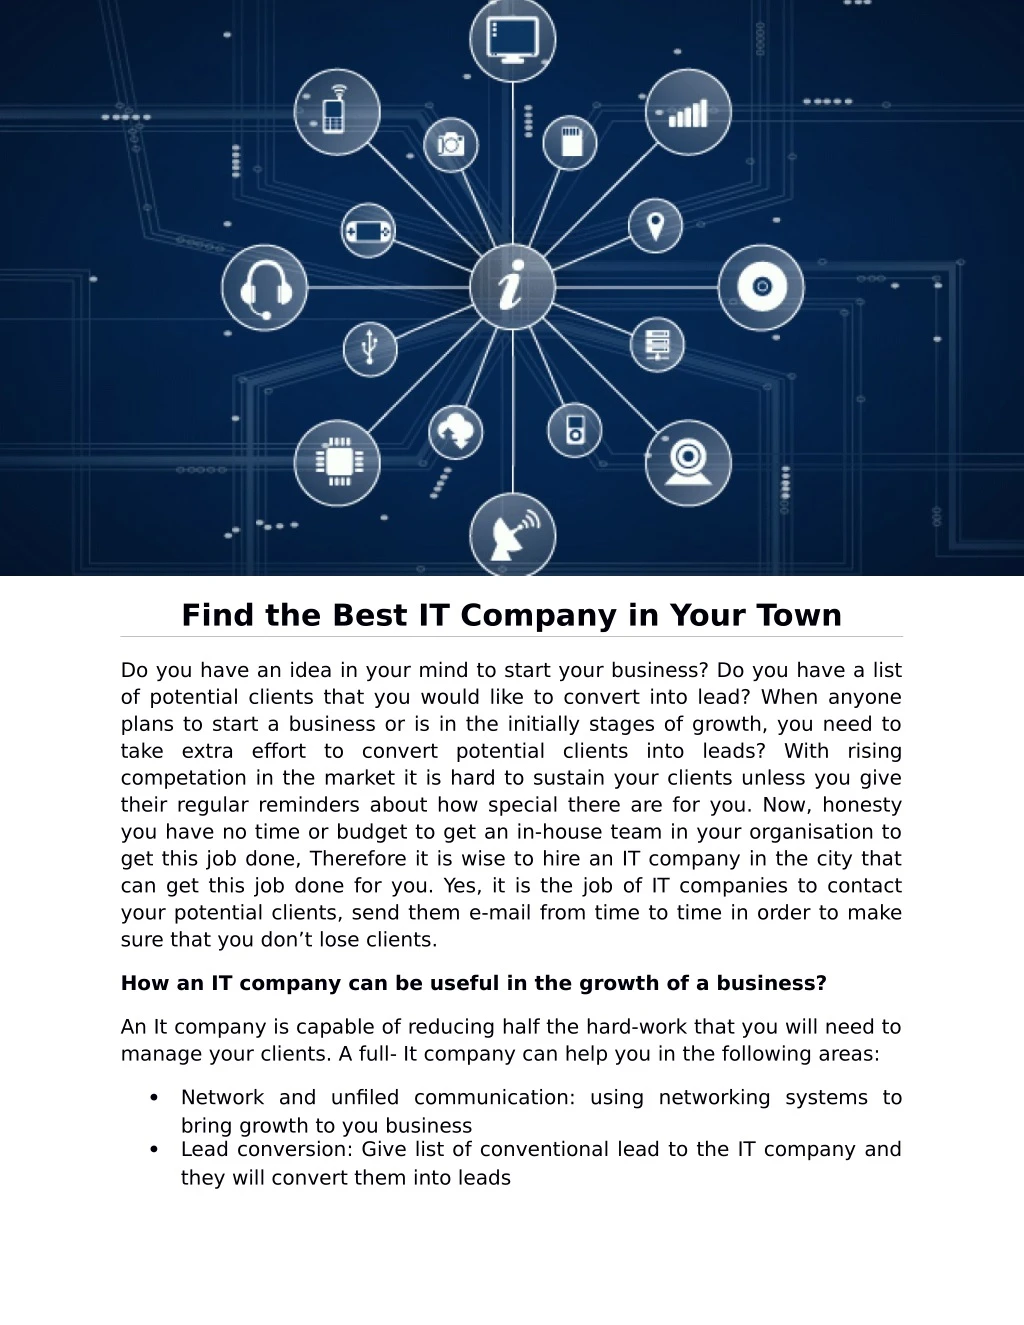 find the best it company in your town